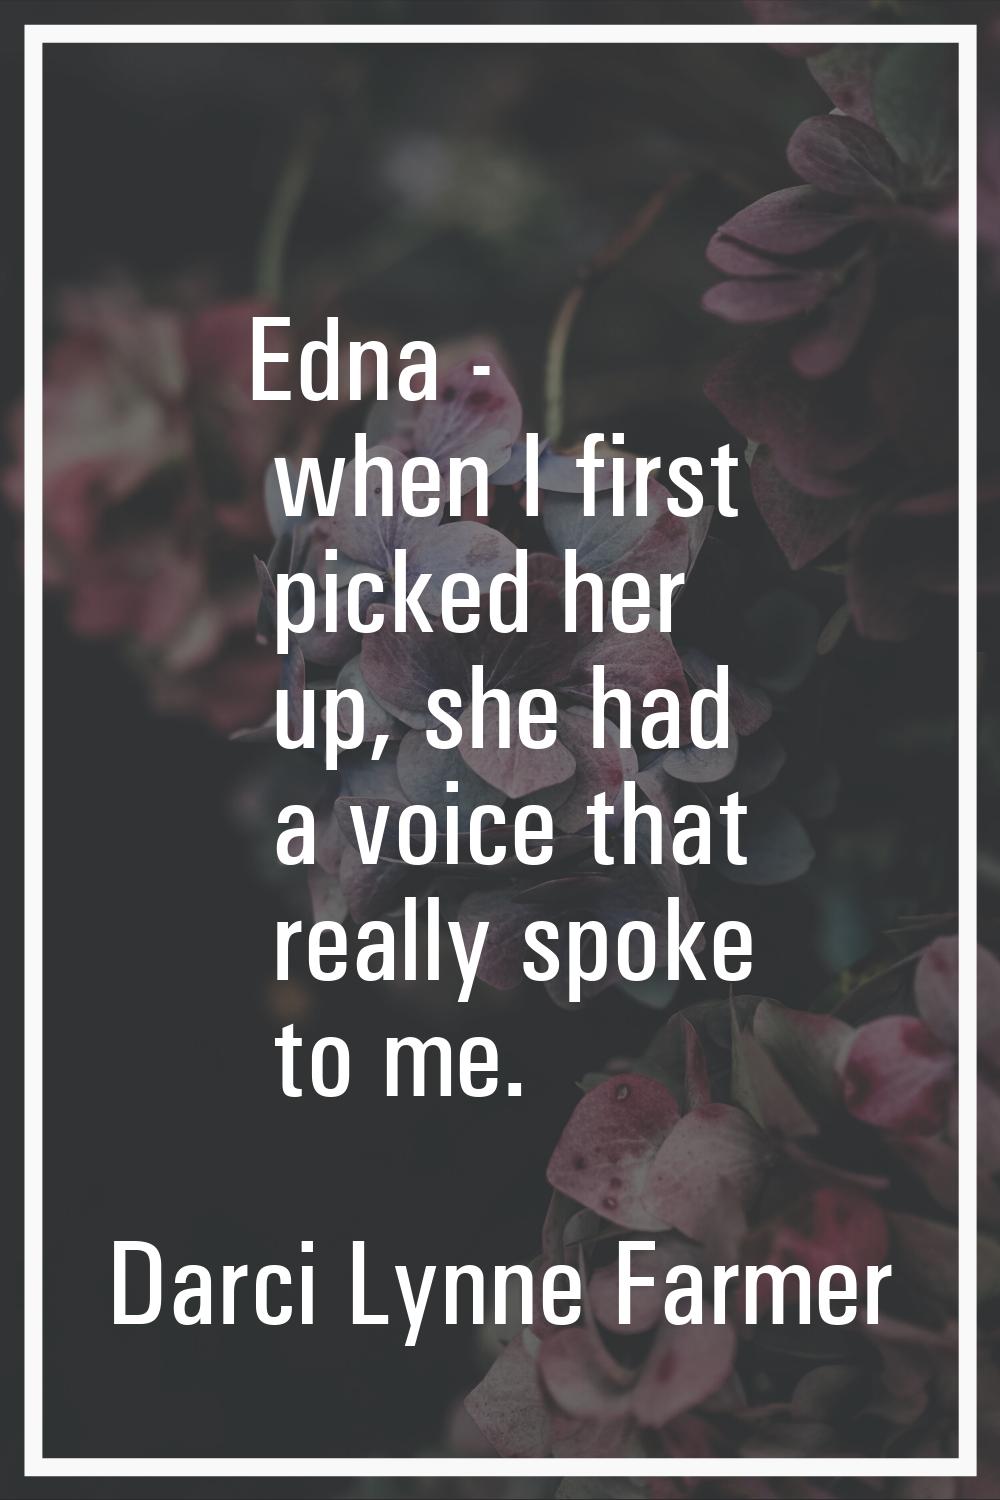 Edna - when I first picked her up, she had a voice that really spoke to me.